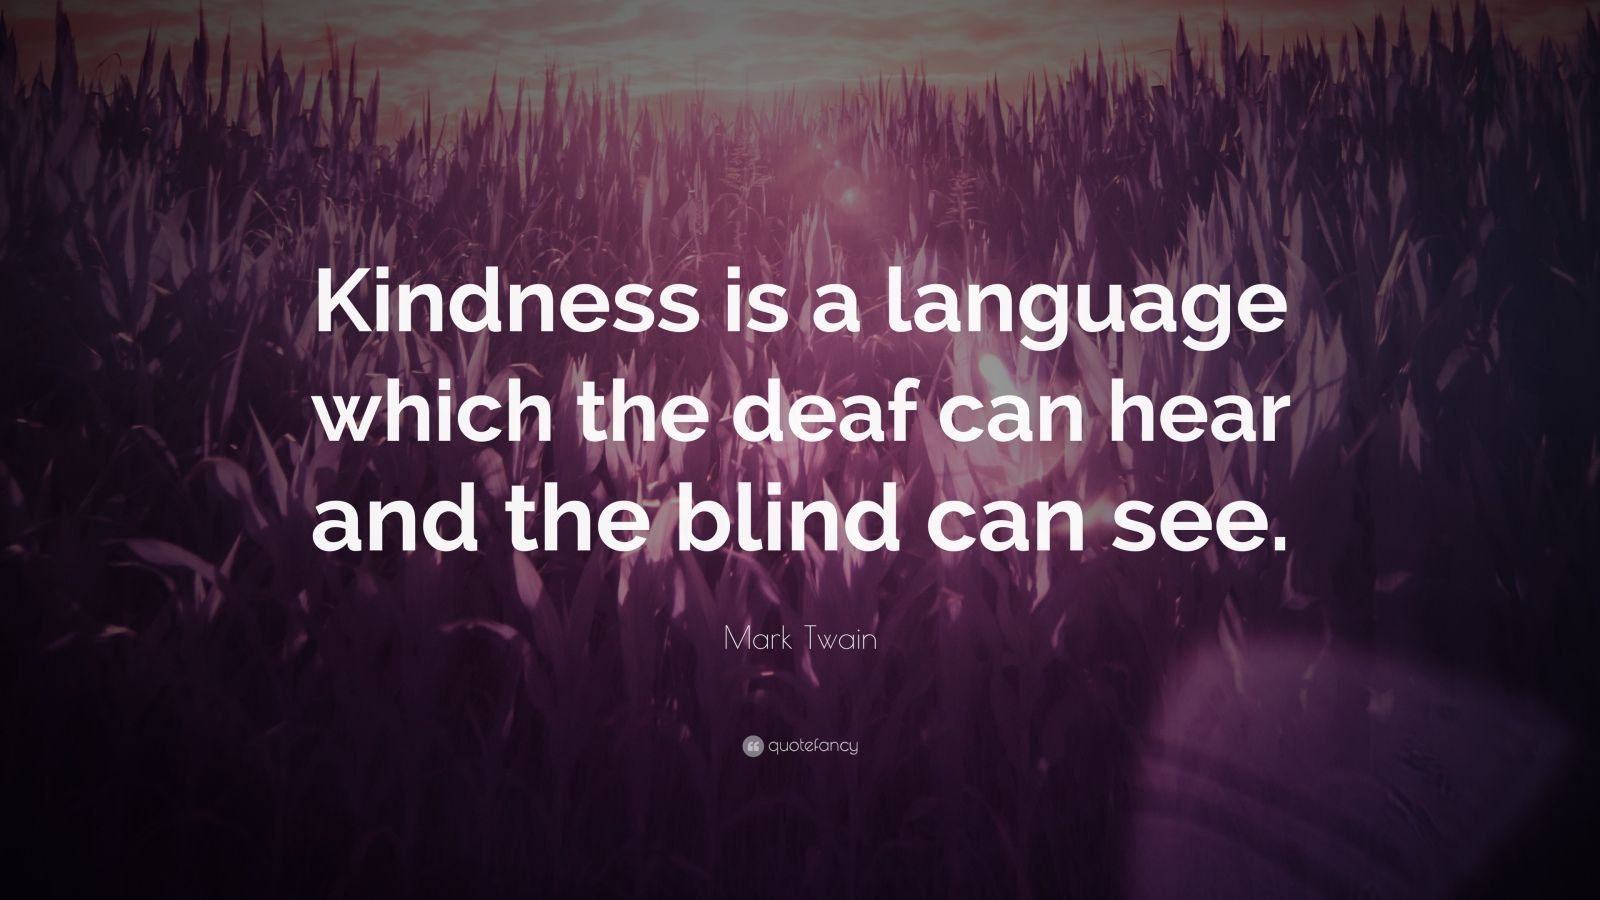 Mark Twain Kindness Quote
 Mark Twain Quote “Kindness is a language which the deaf